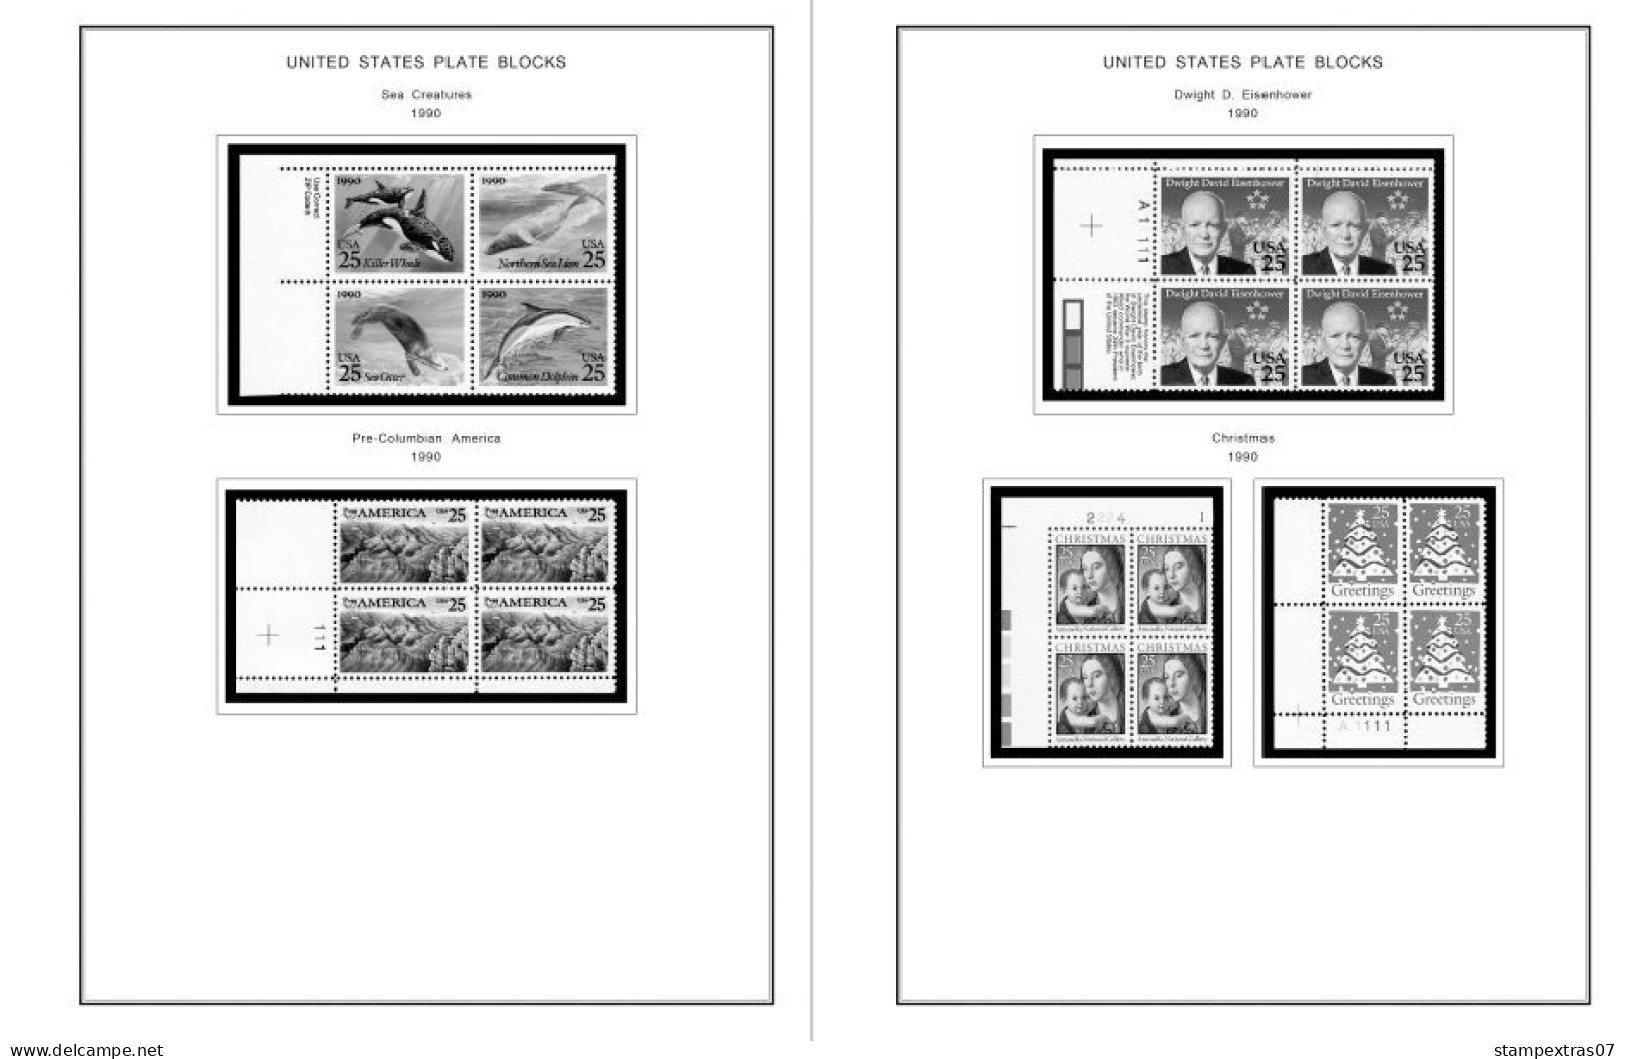 US 1990-1999 PLATE BLOCKS STAMP ALBUM PAGES (119 B&w Illustrated Pages) - Englisch